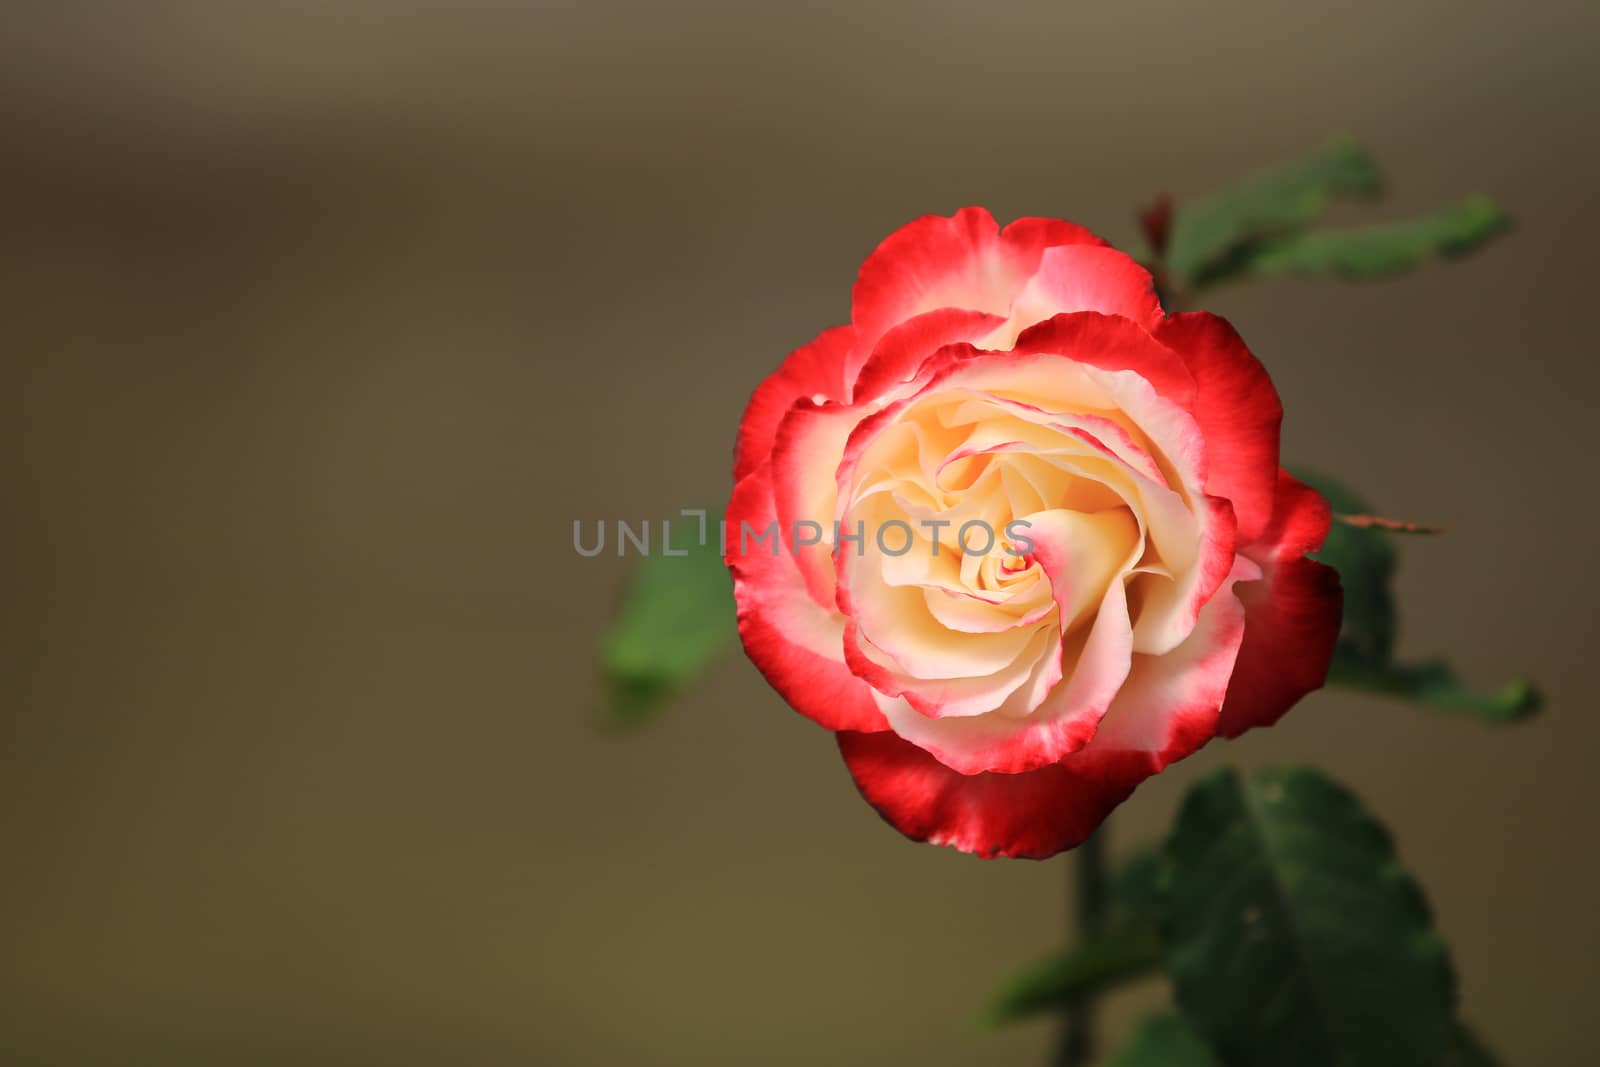 Red white rose flower on background blurry leaf in the garden of roses,Delicate beauty of close-up rose